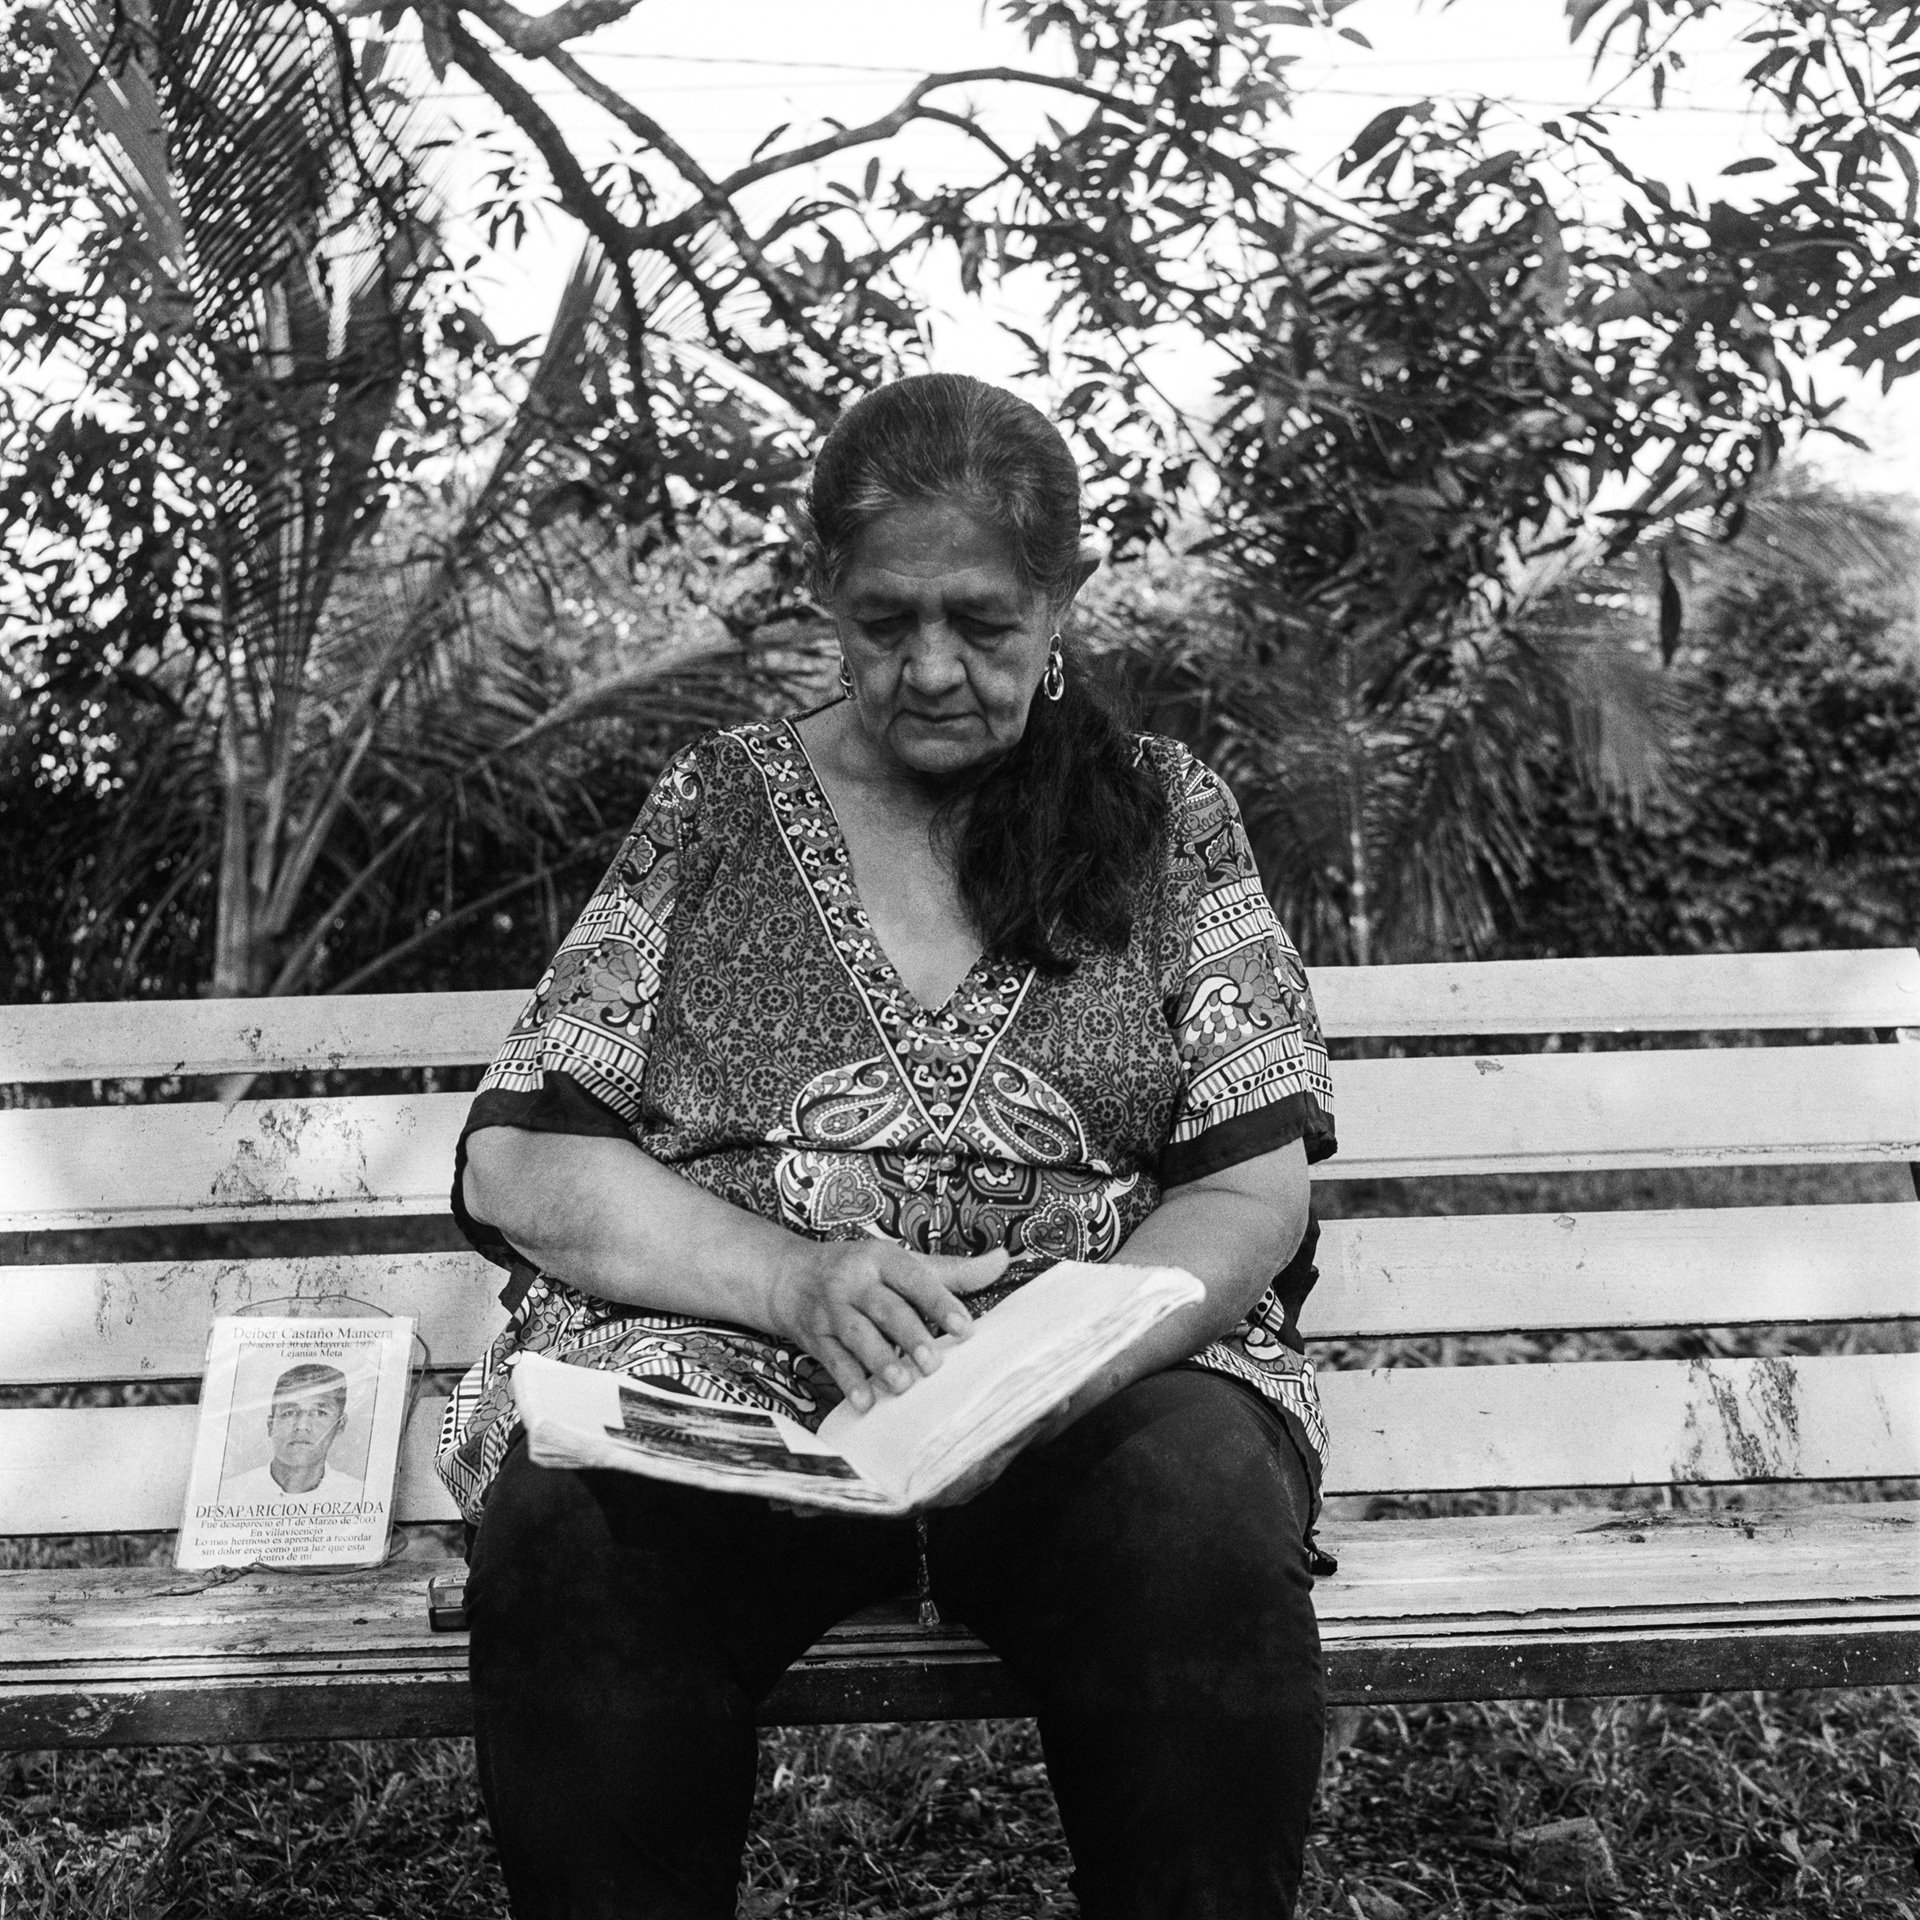 Nidia Mancera flips through her memory diary, the day before the 17th anniversary of her son Deiber Castaño Mancera&#39;s disappearance. Deiber disappeared in March 2003, when he was 24. Nidia says she hopes that her son is alive and that someday he will return home.